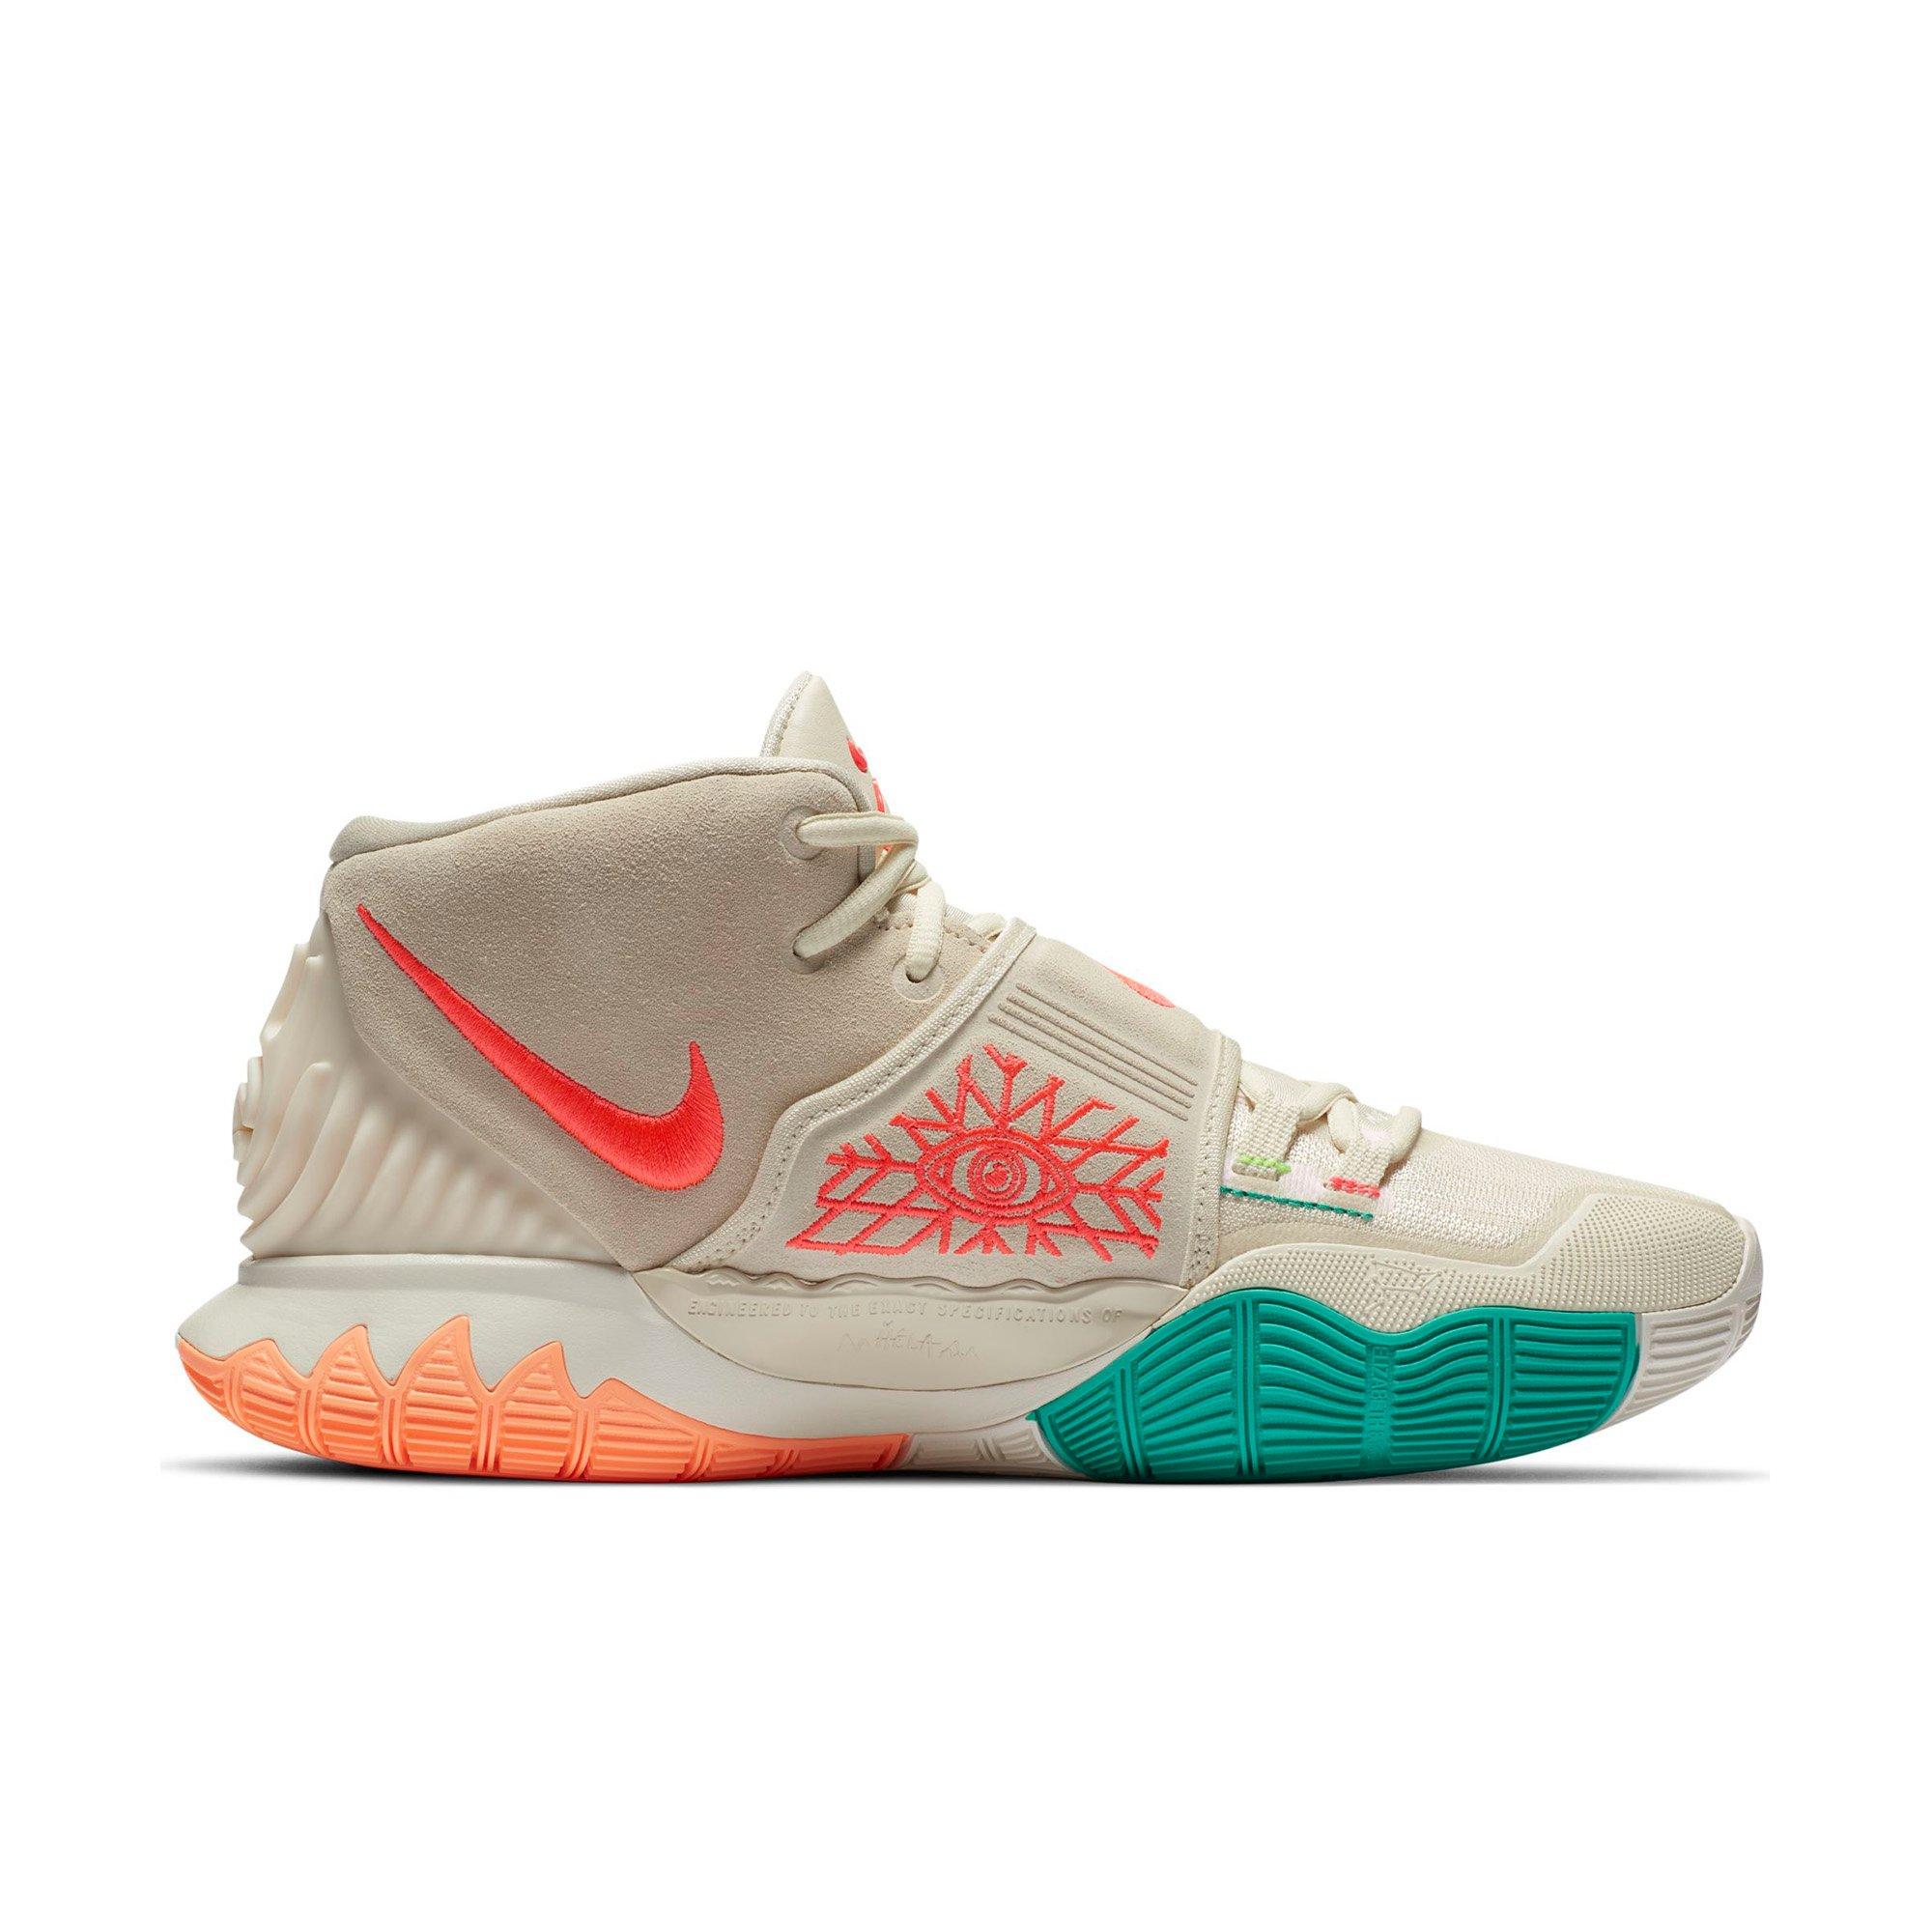 kyrie 6 mens basketball shoes